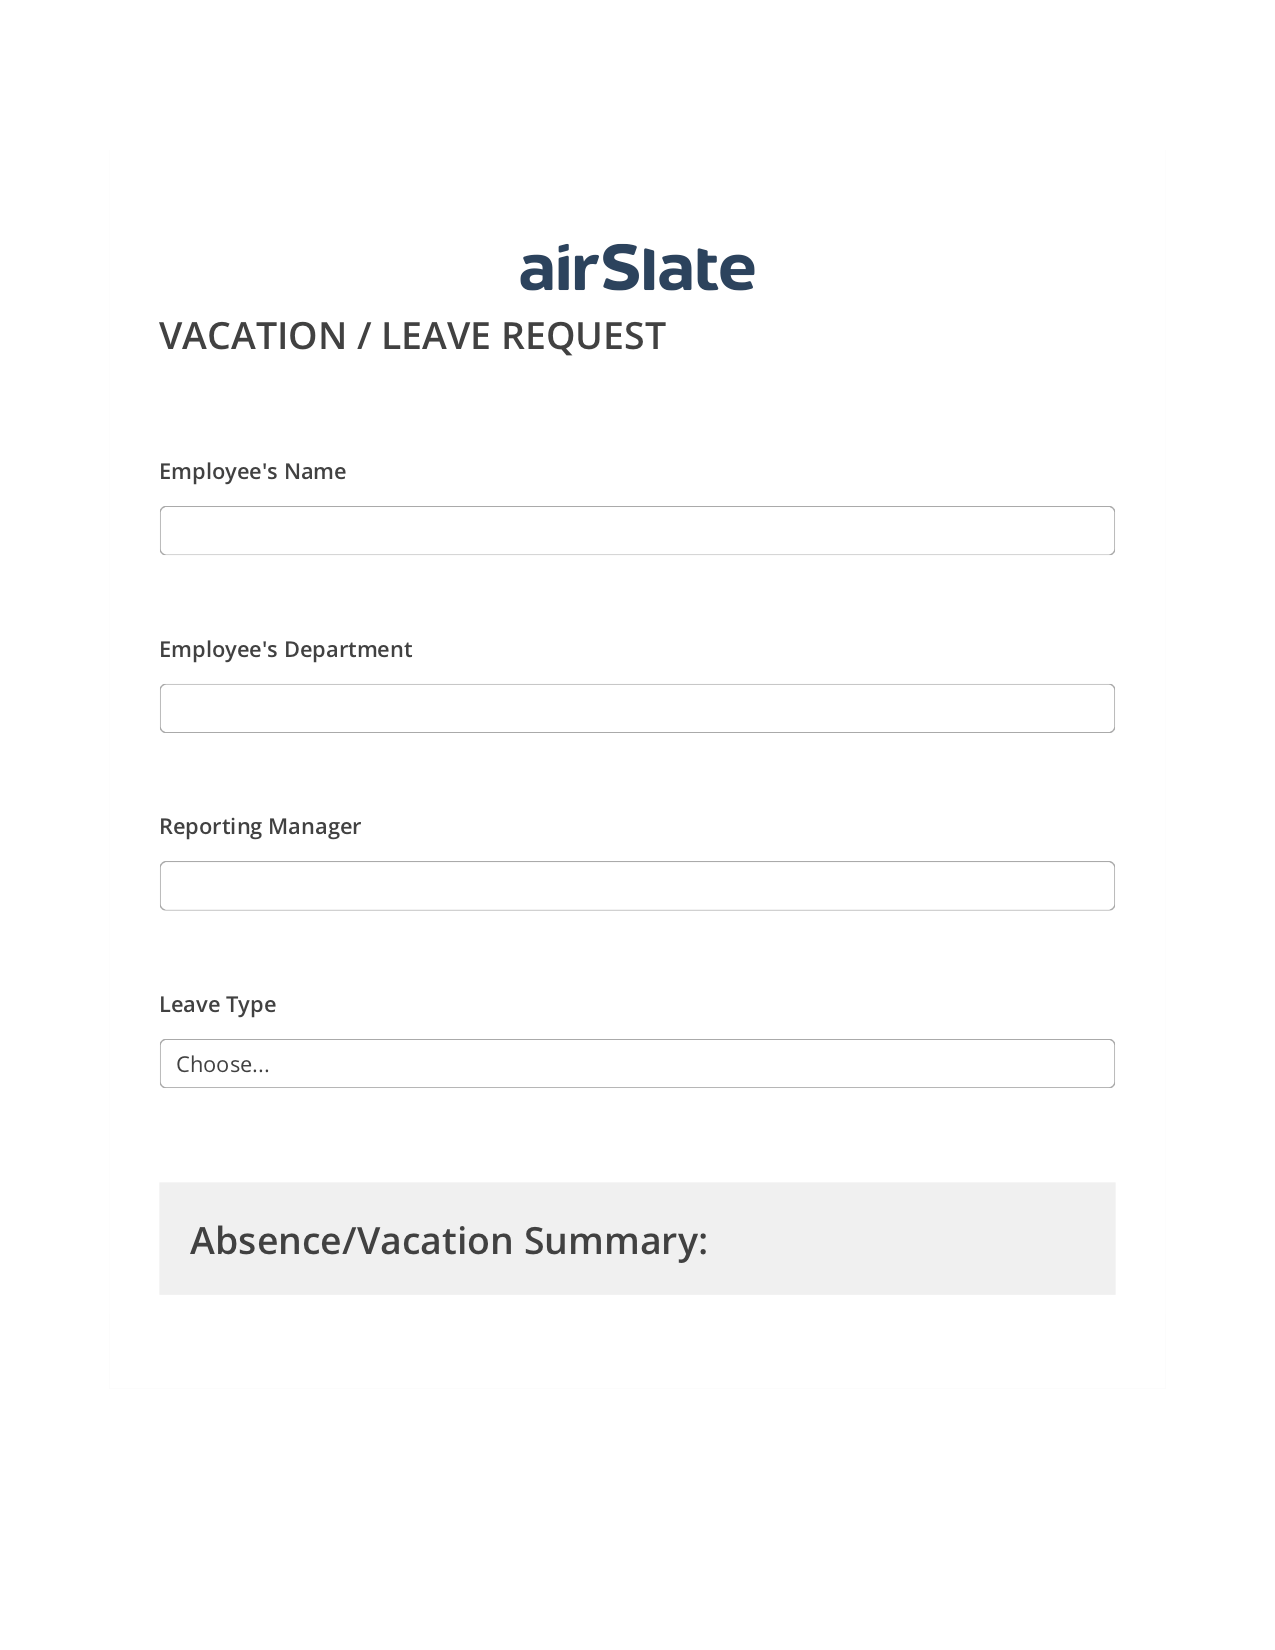 Multirole Vacation/Leave Request Workflow Pre-fill Document Bot, Remove Tags From Slate Bot, Archive to Google Drive Bot